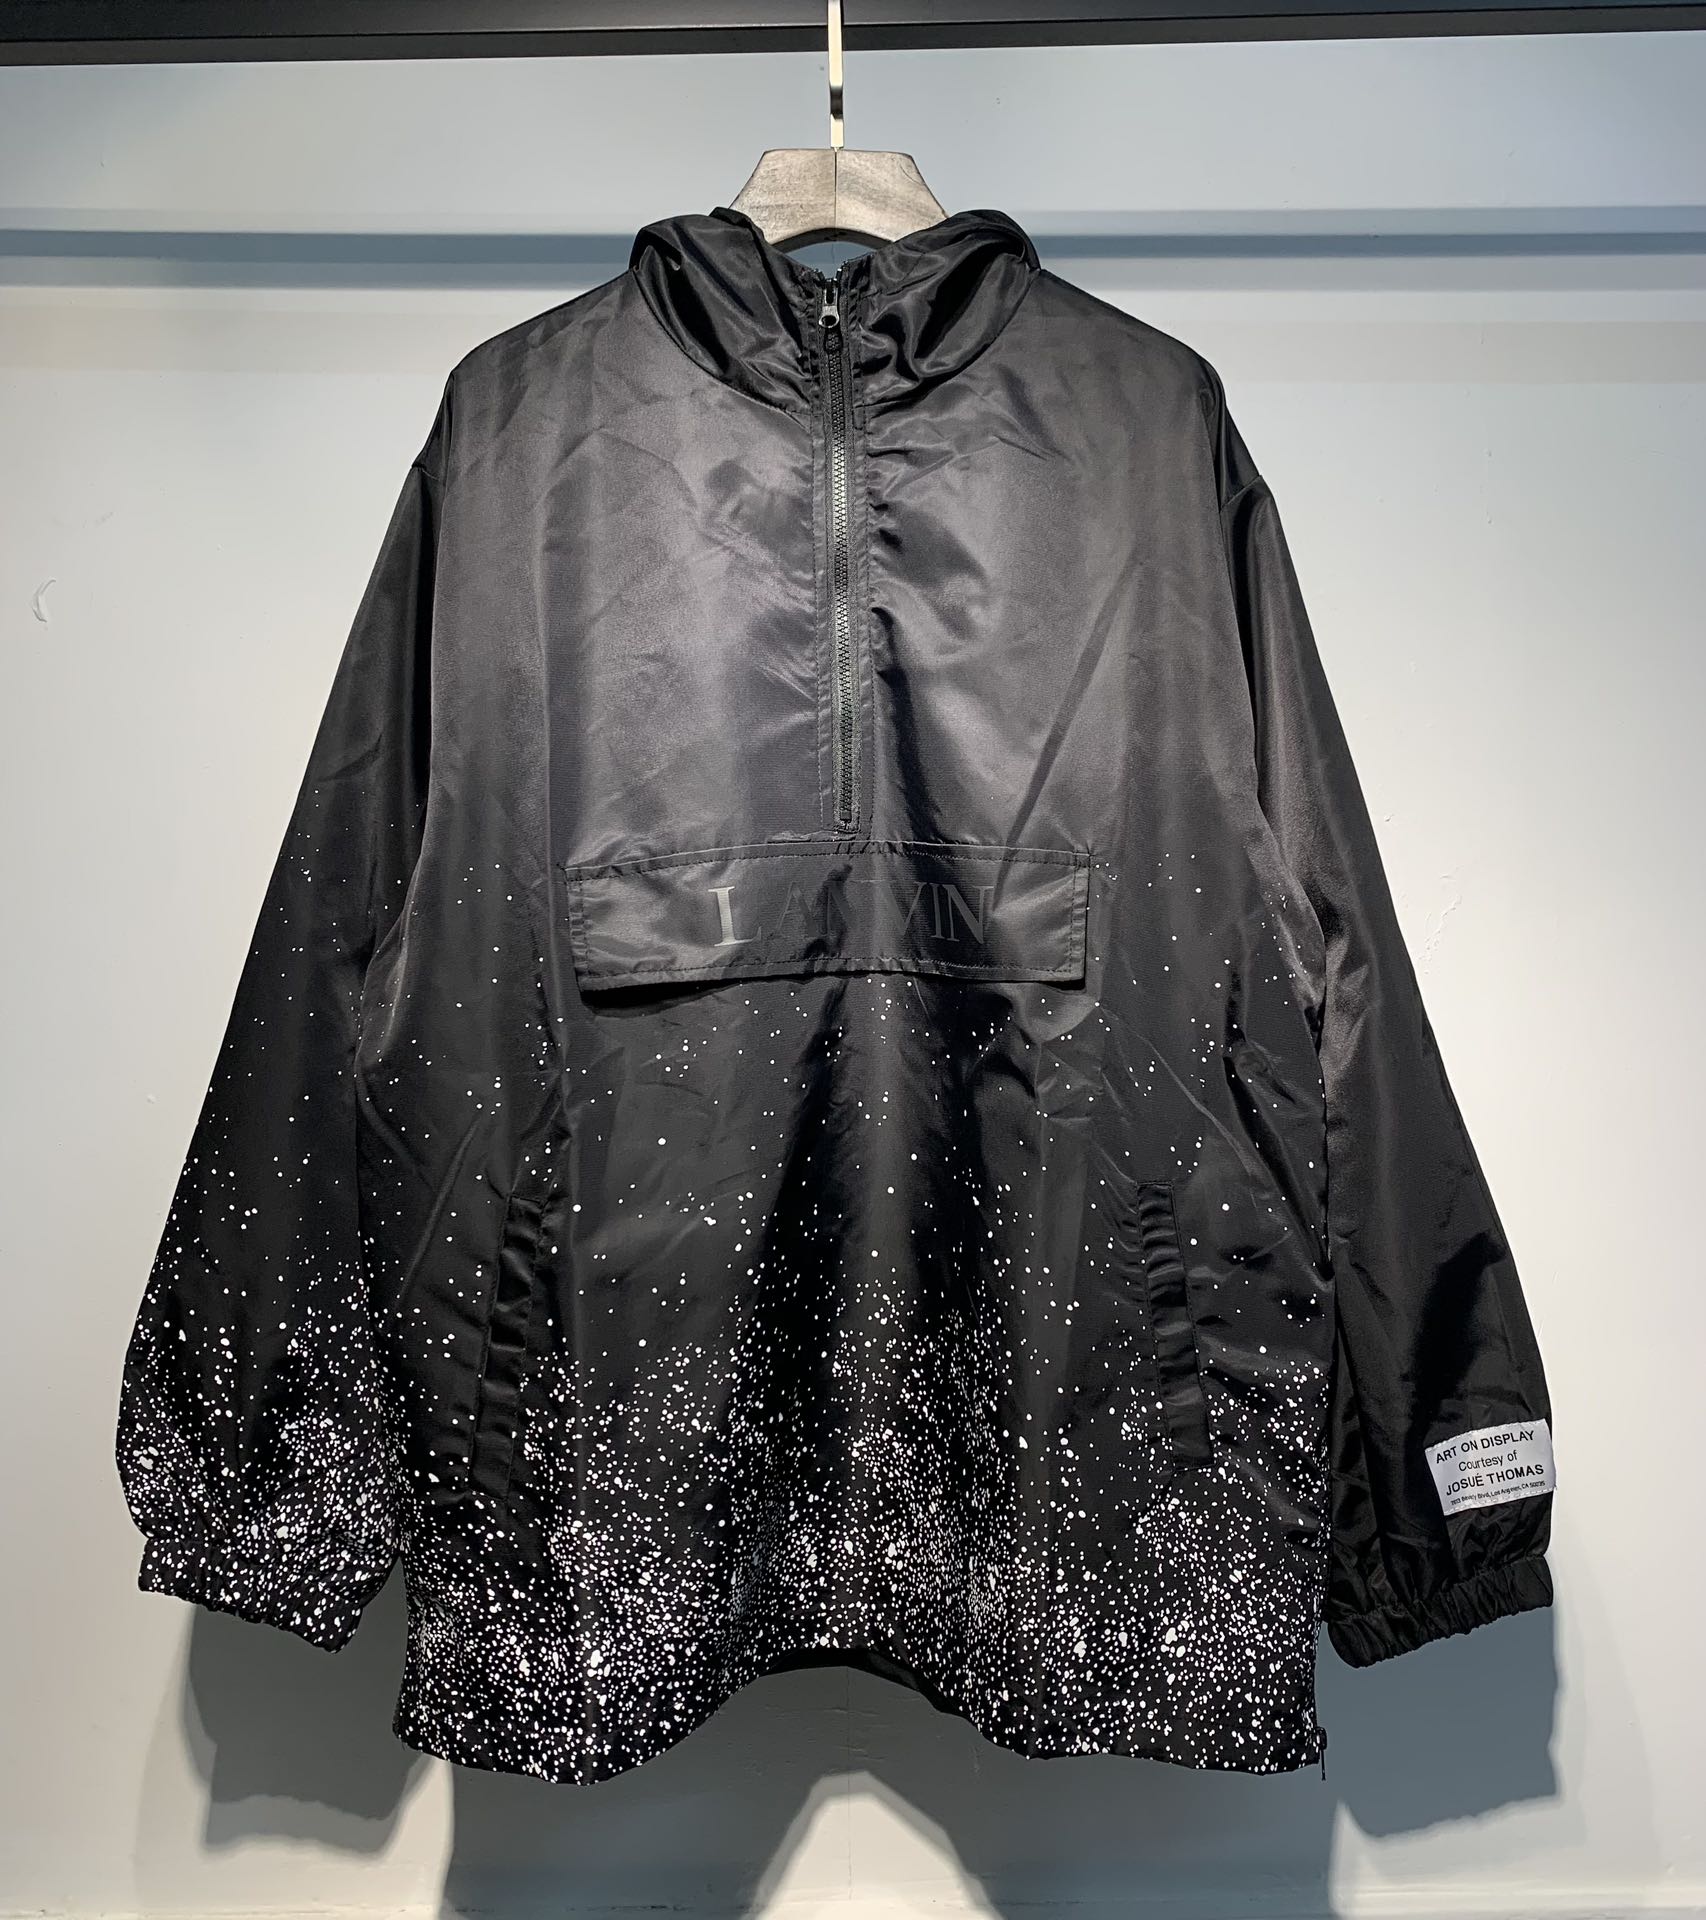 Gallery Dept Clothing Coats & Jackets Black Fall/Winter Collection Hooded Top